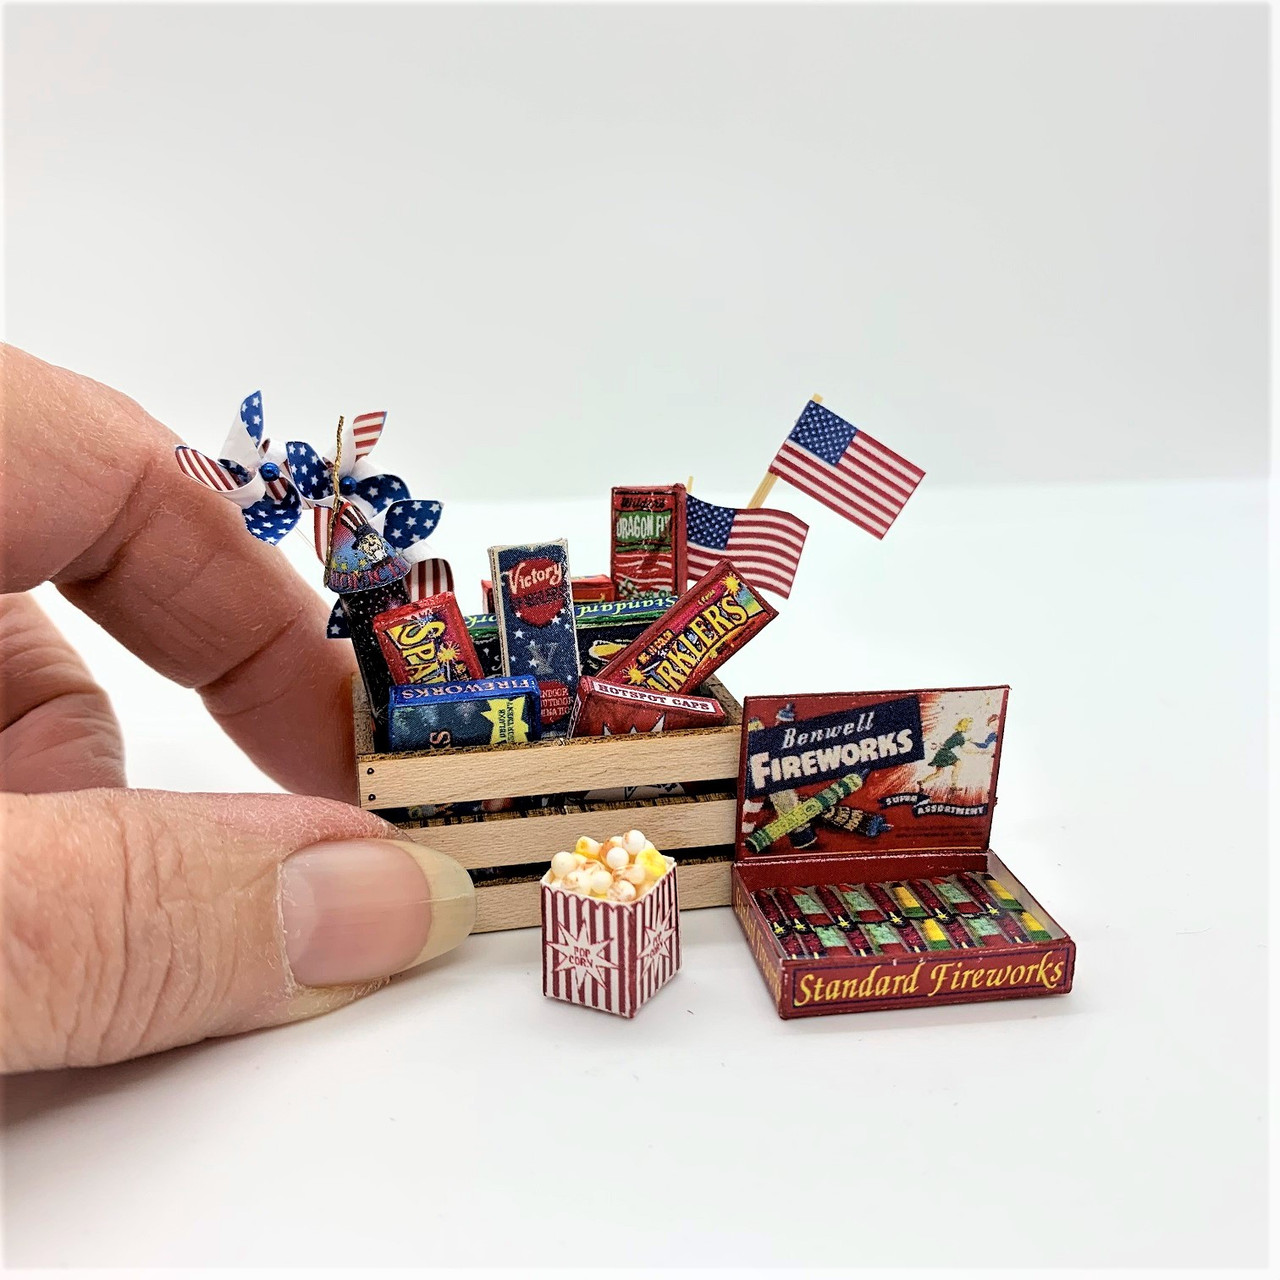 Fireworks Display Box (UFN0125) with hand for scale